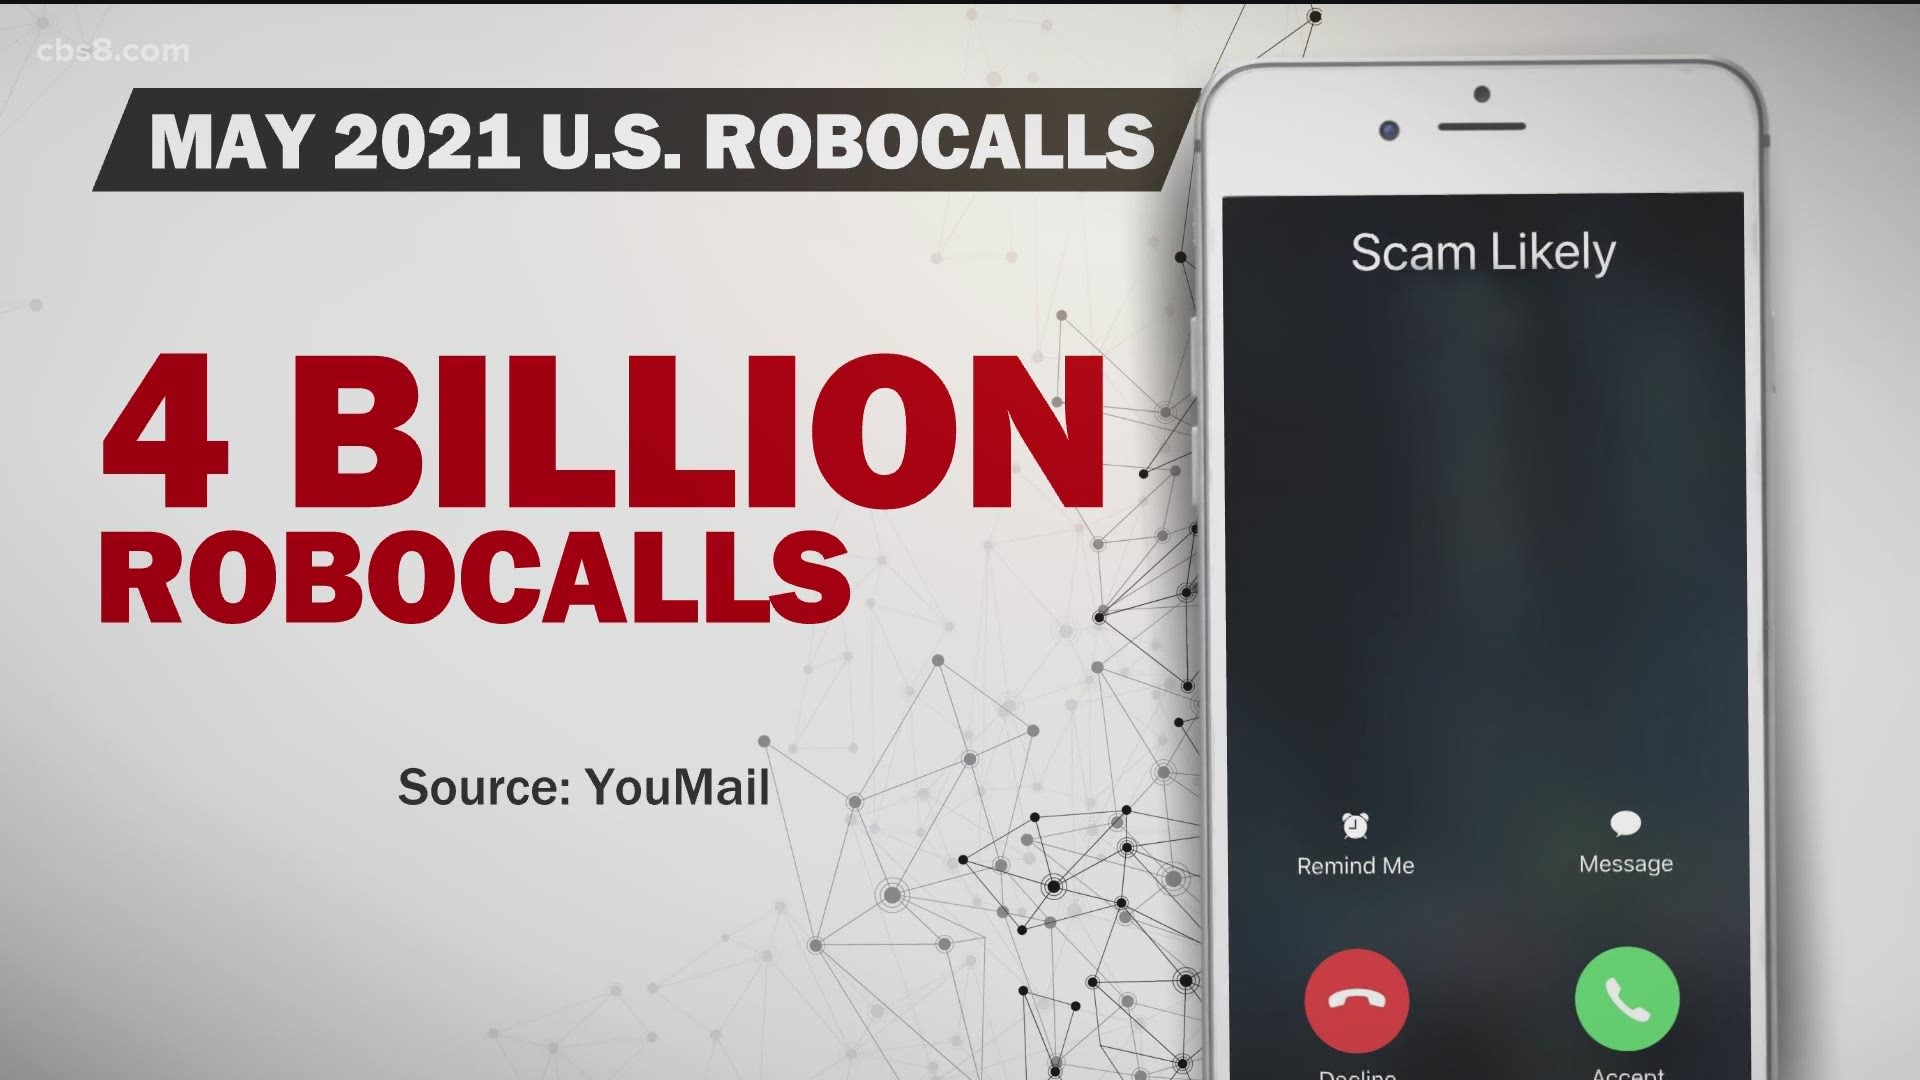 Starting Wednesday, wireless carriers must have technology in place to stop robocalls.